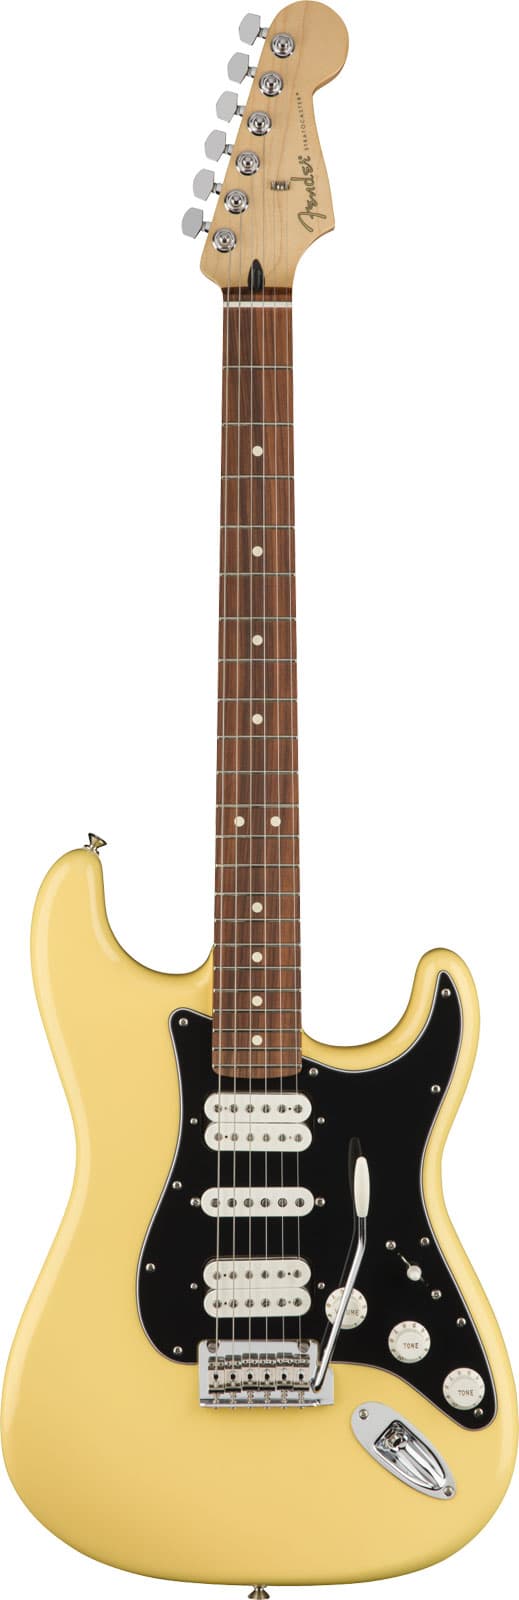 FENDER MEXICAN PLAYER STRATOCASTER HSH PF, BUTTERCREAM